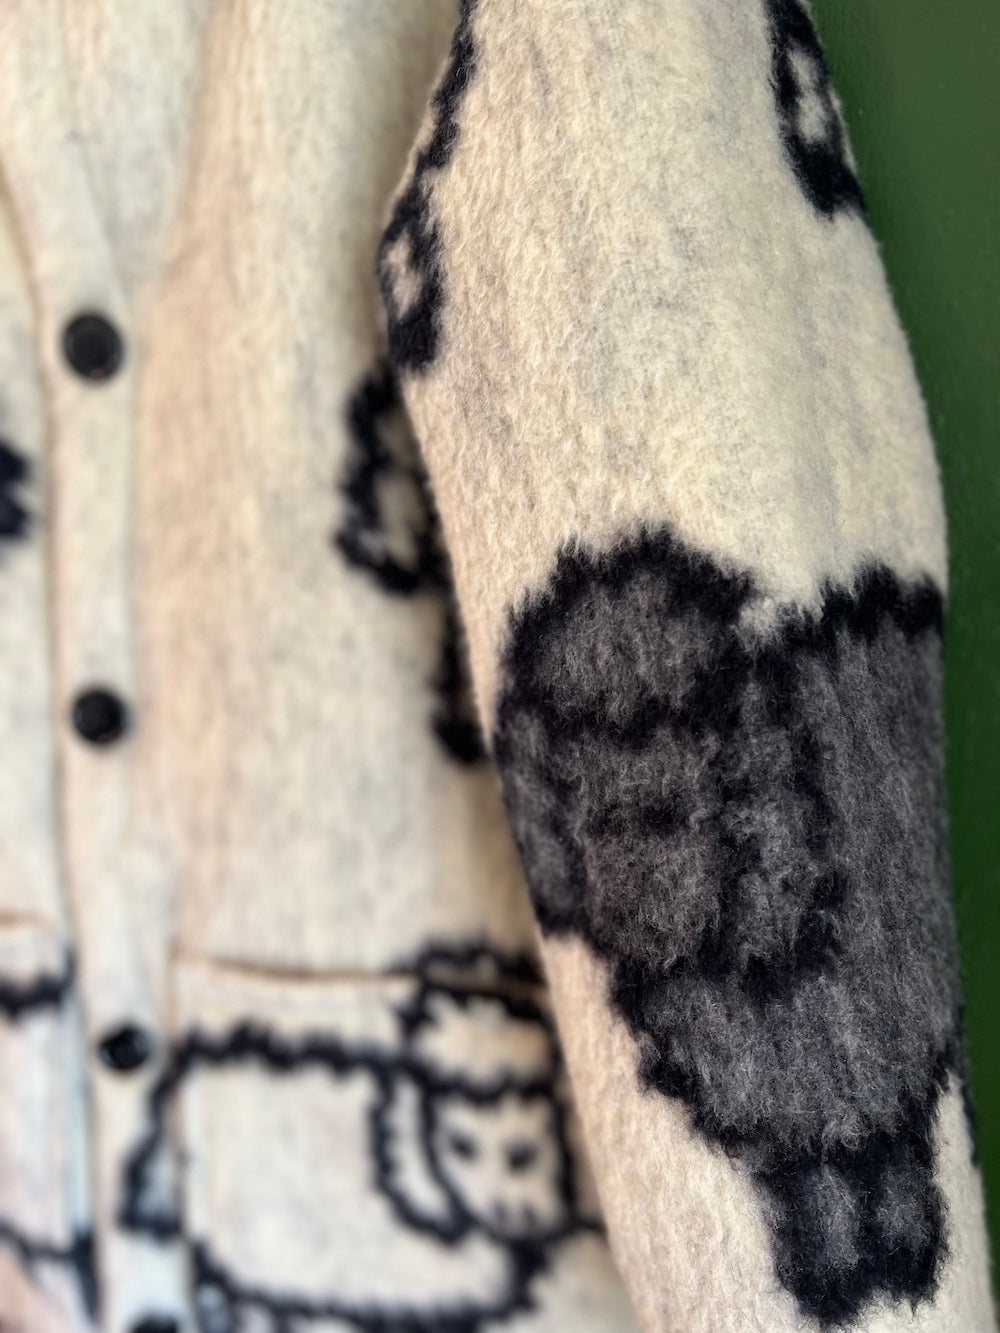 Sheep Blanket Coat With Removable Collar